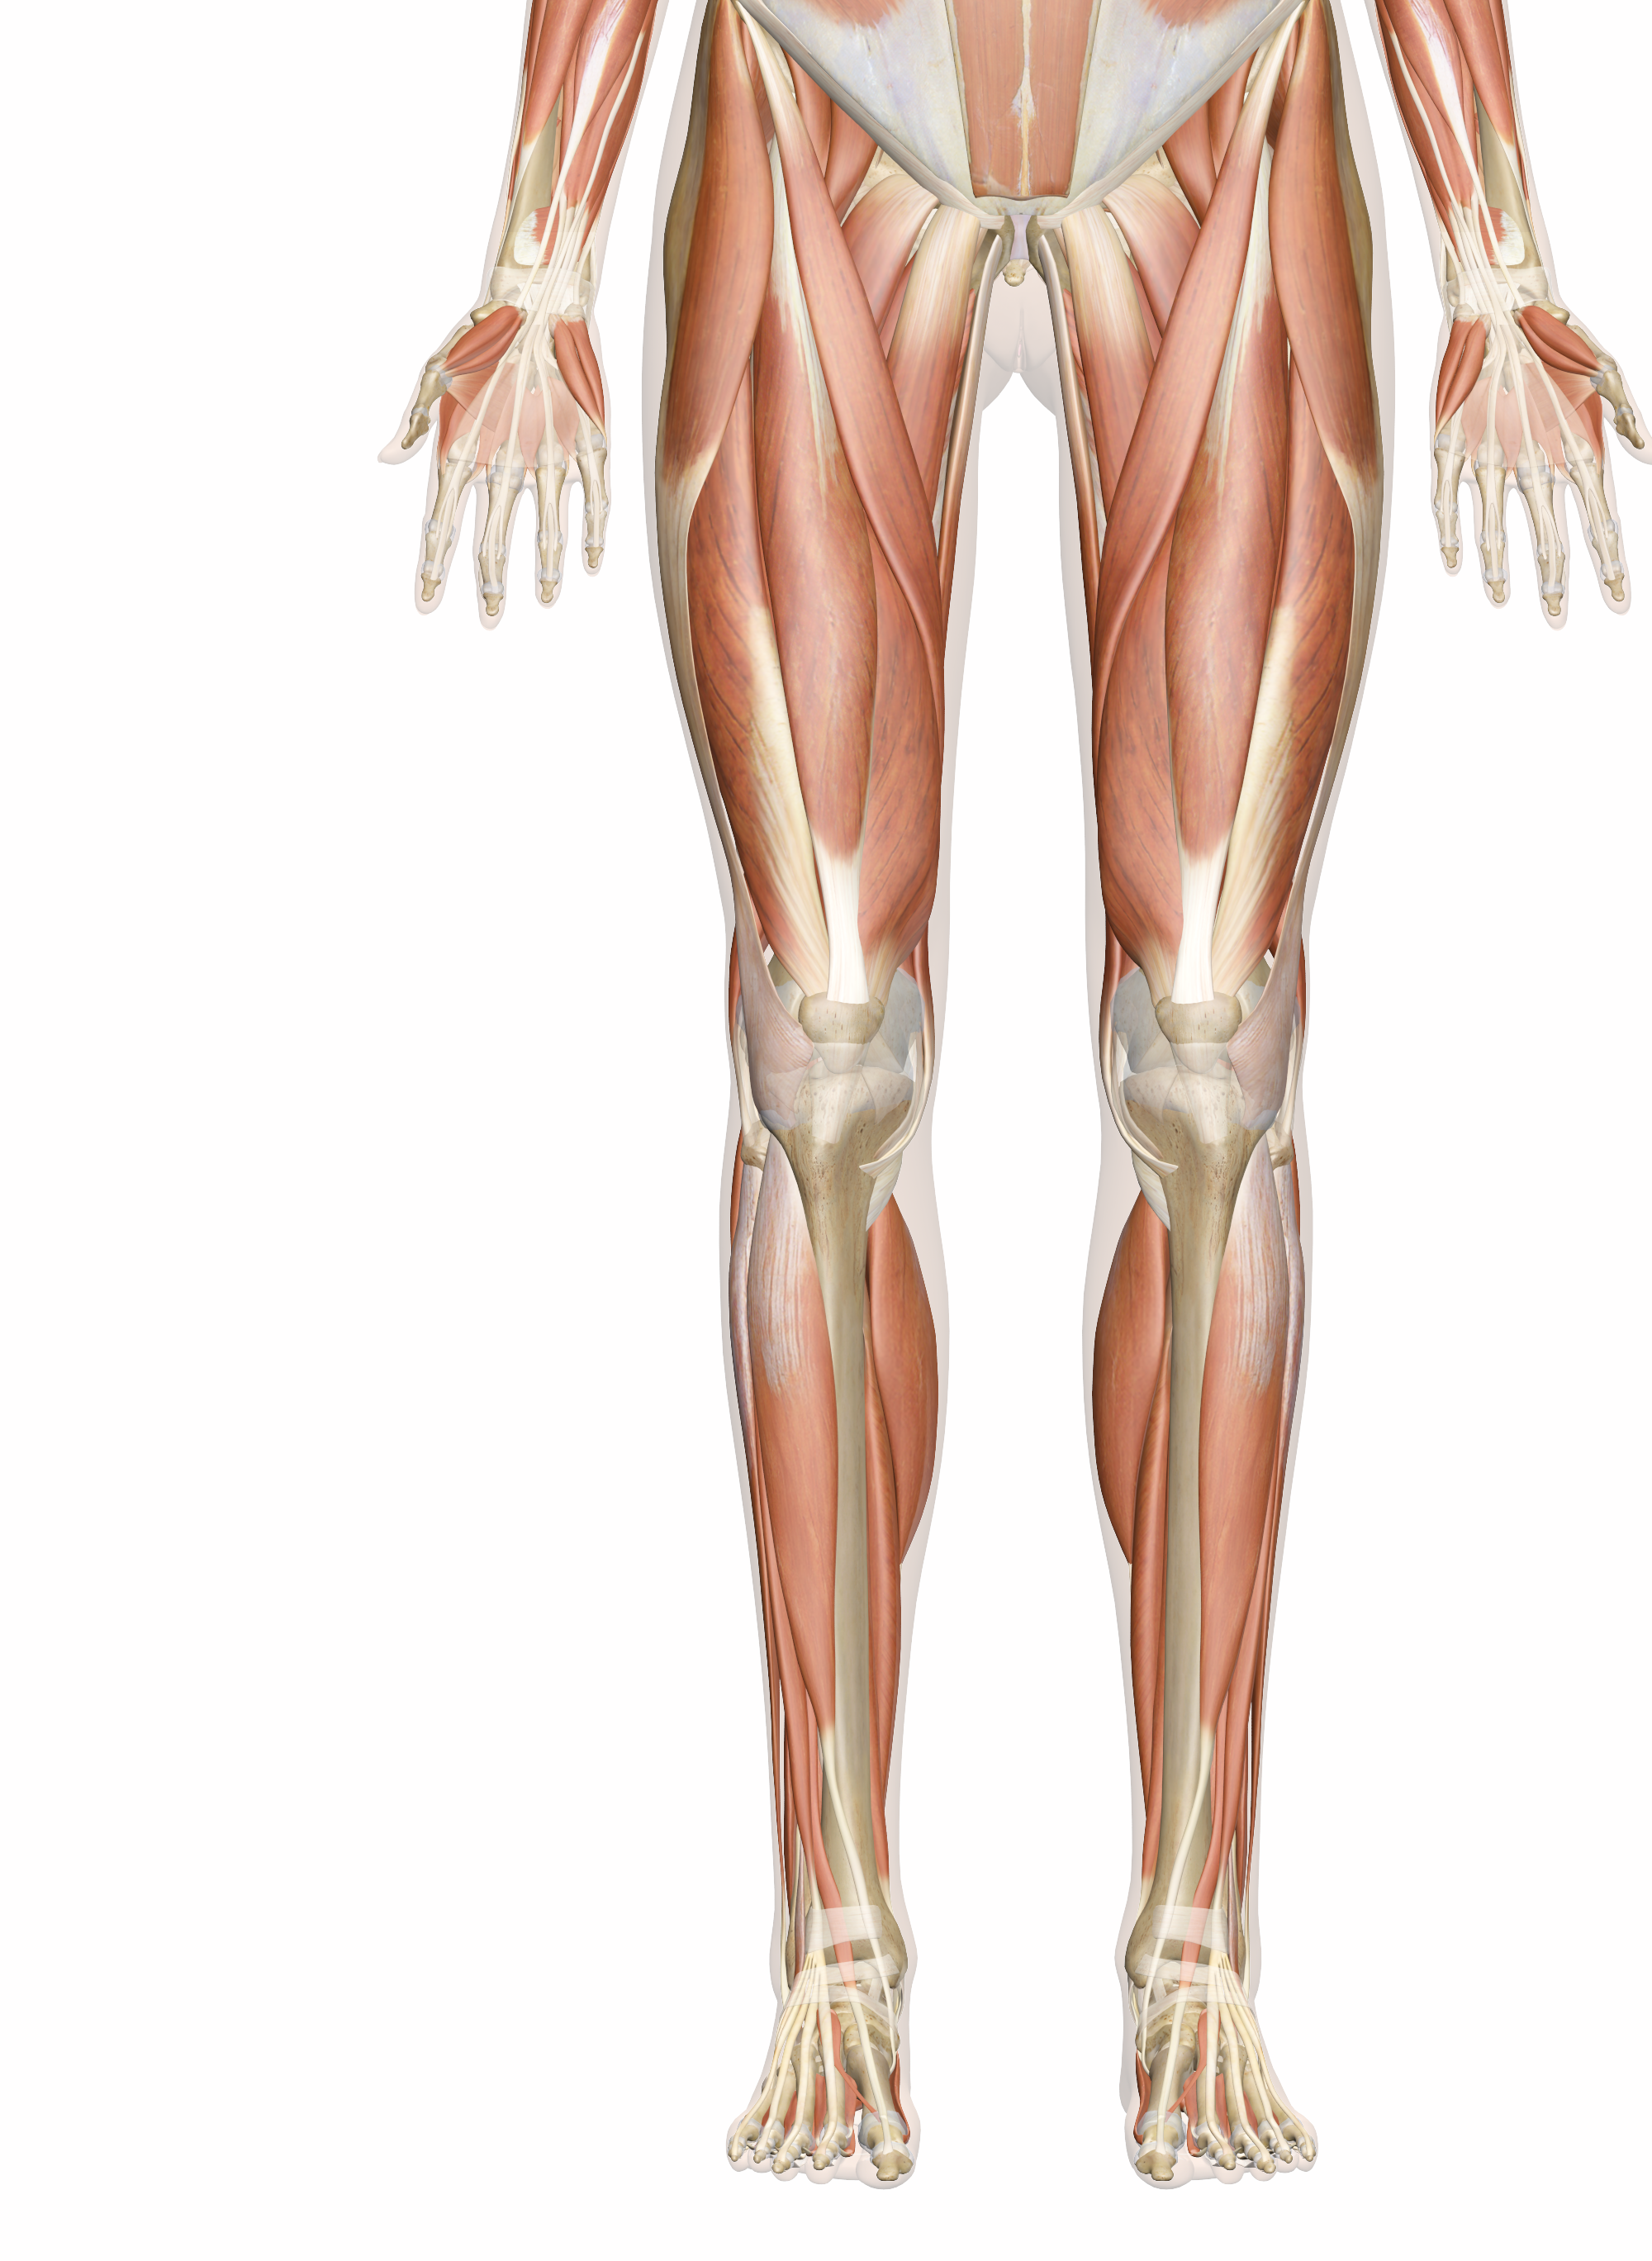 Muscles of the Leg and Foot